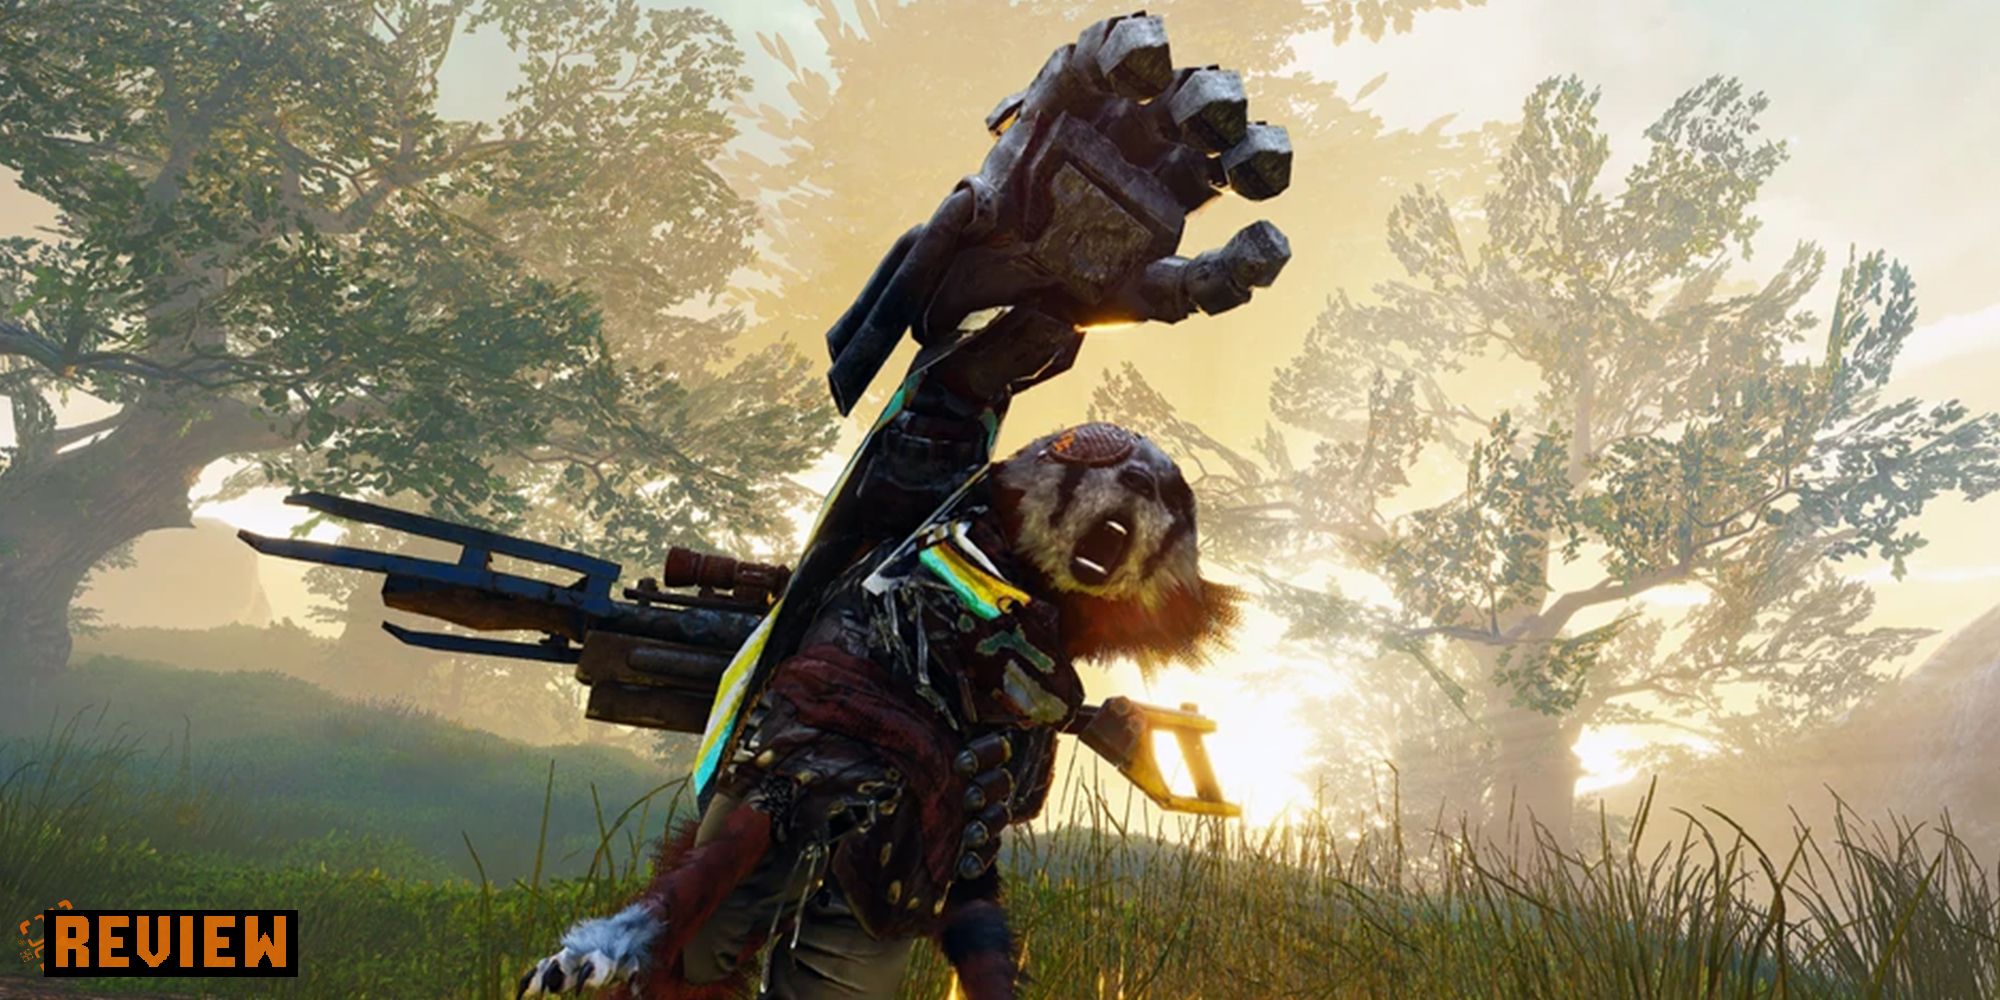 Game image from Biomutant.